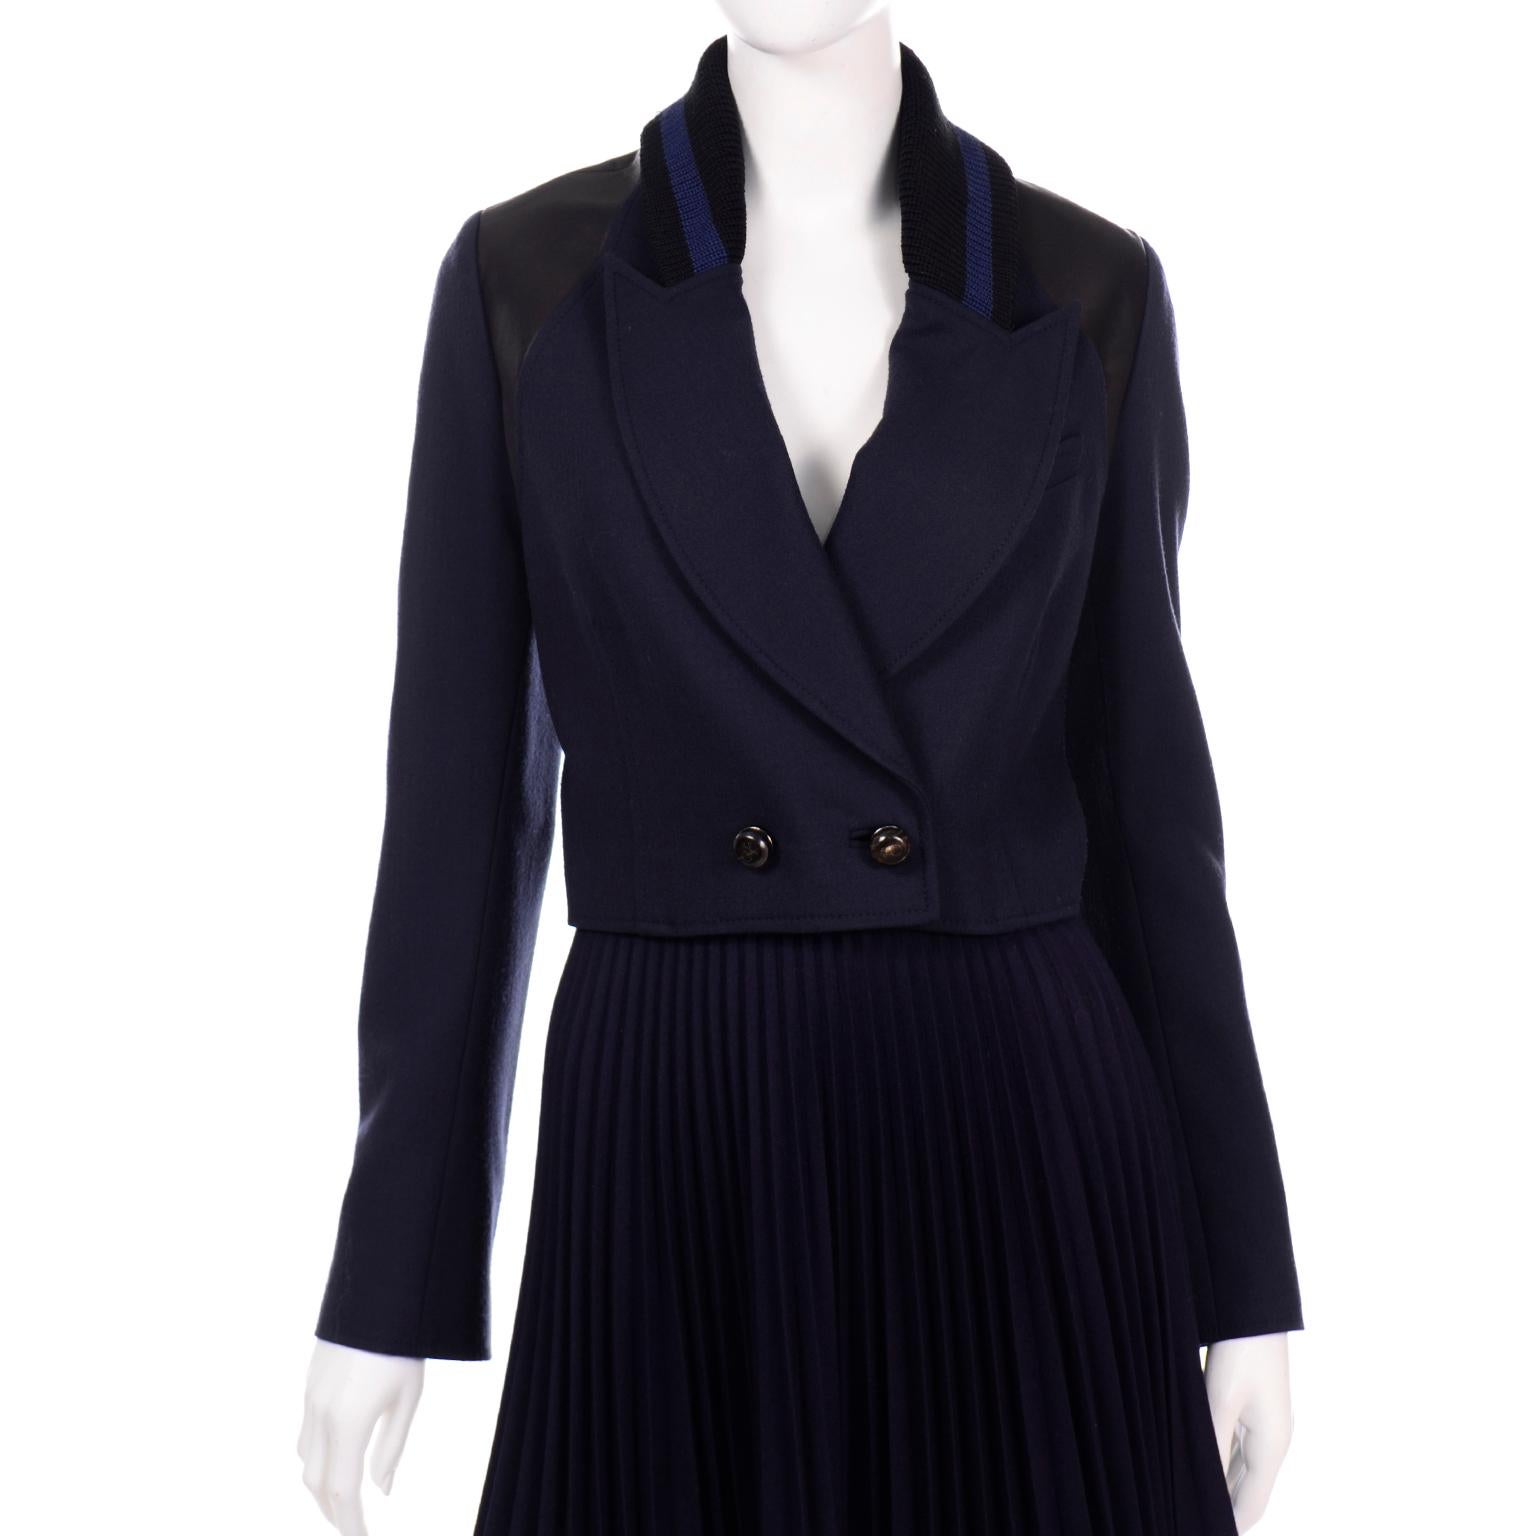 Black Proenza Schouler Midnight Blue Knit Cropped Ribbed Jacket and Pleated Skirt Suit